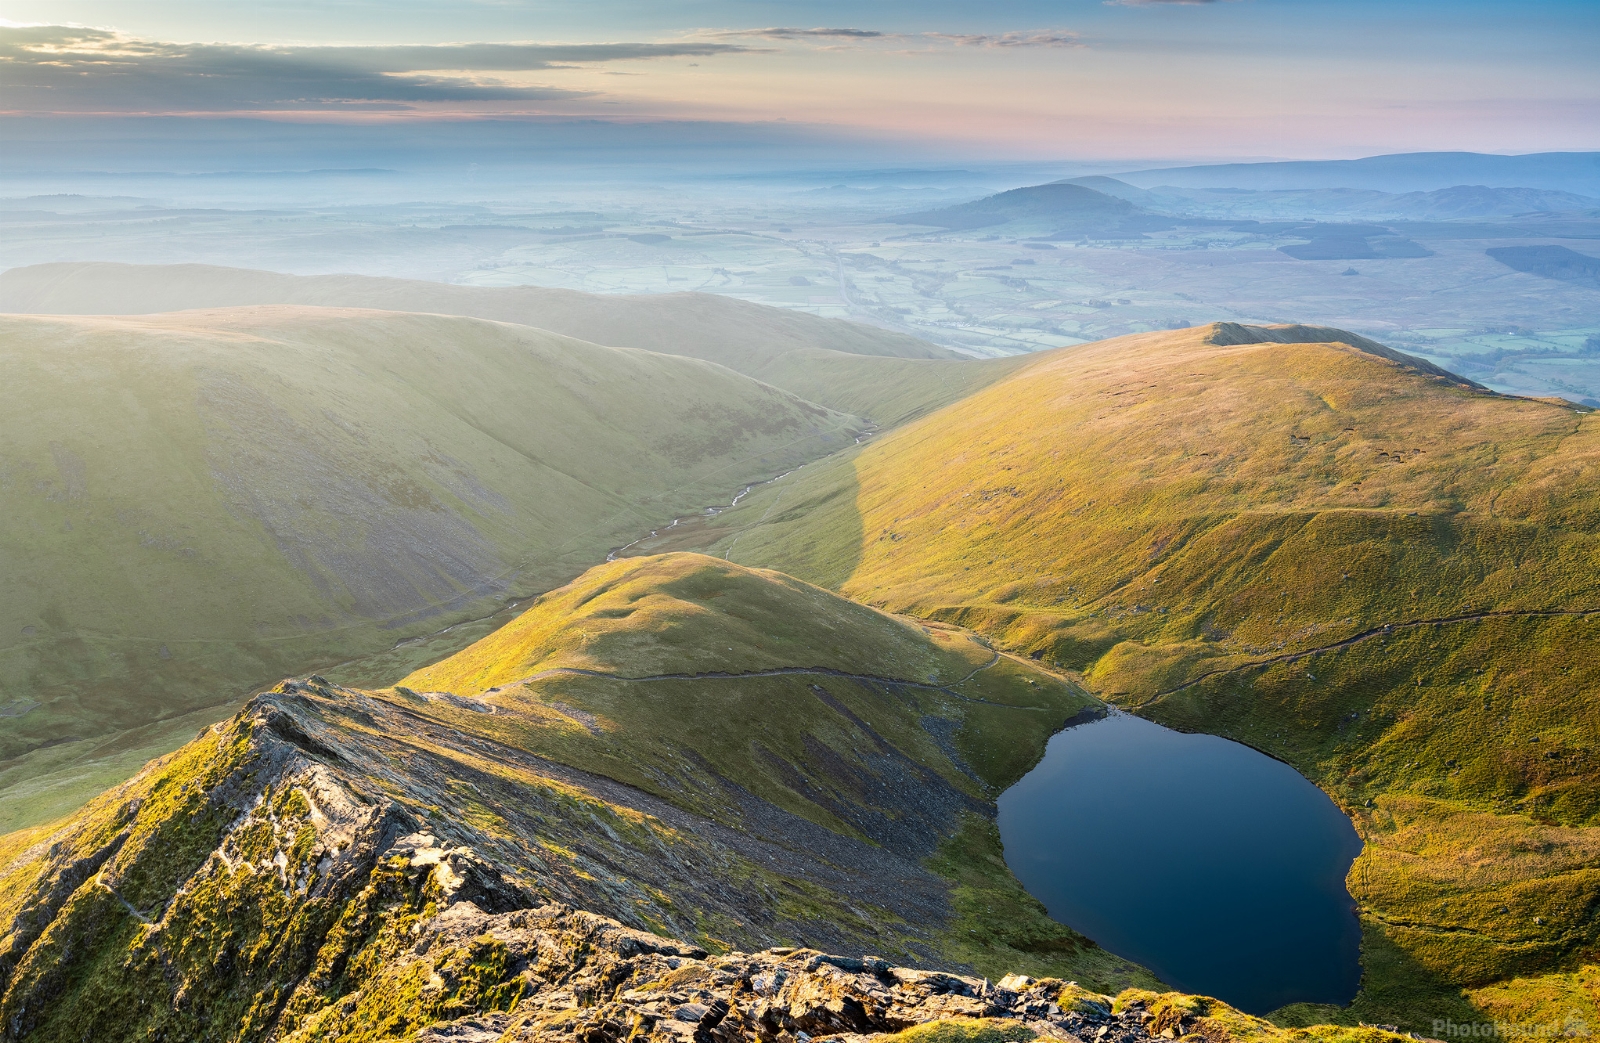 Image of Blencathra by James Grant